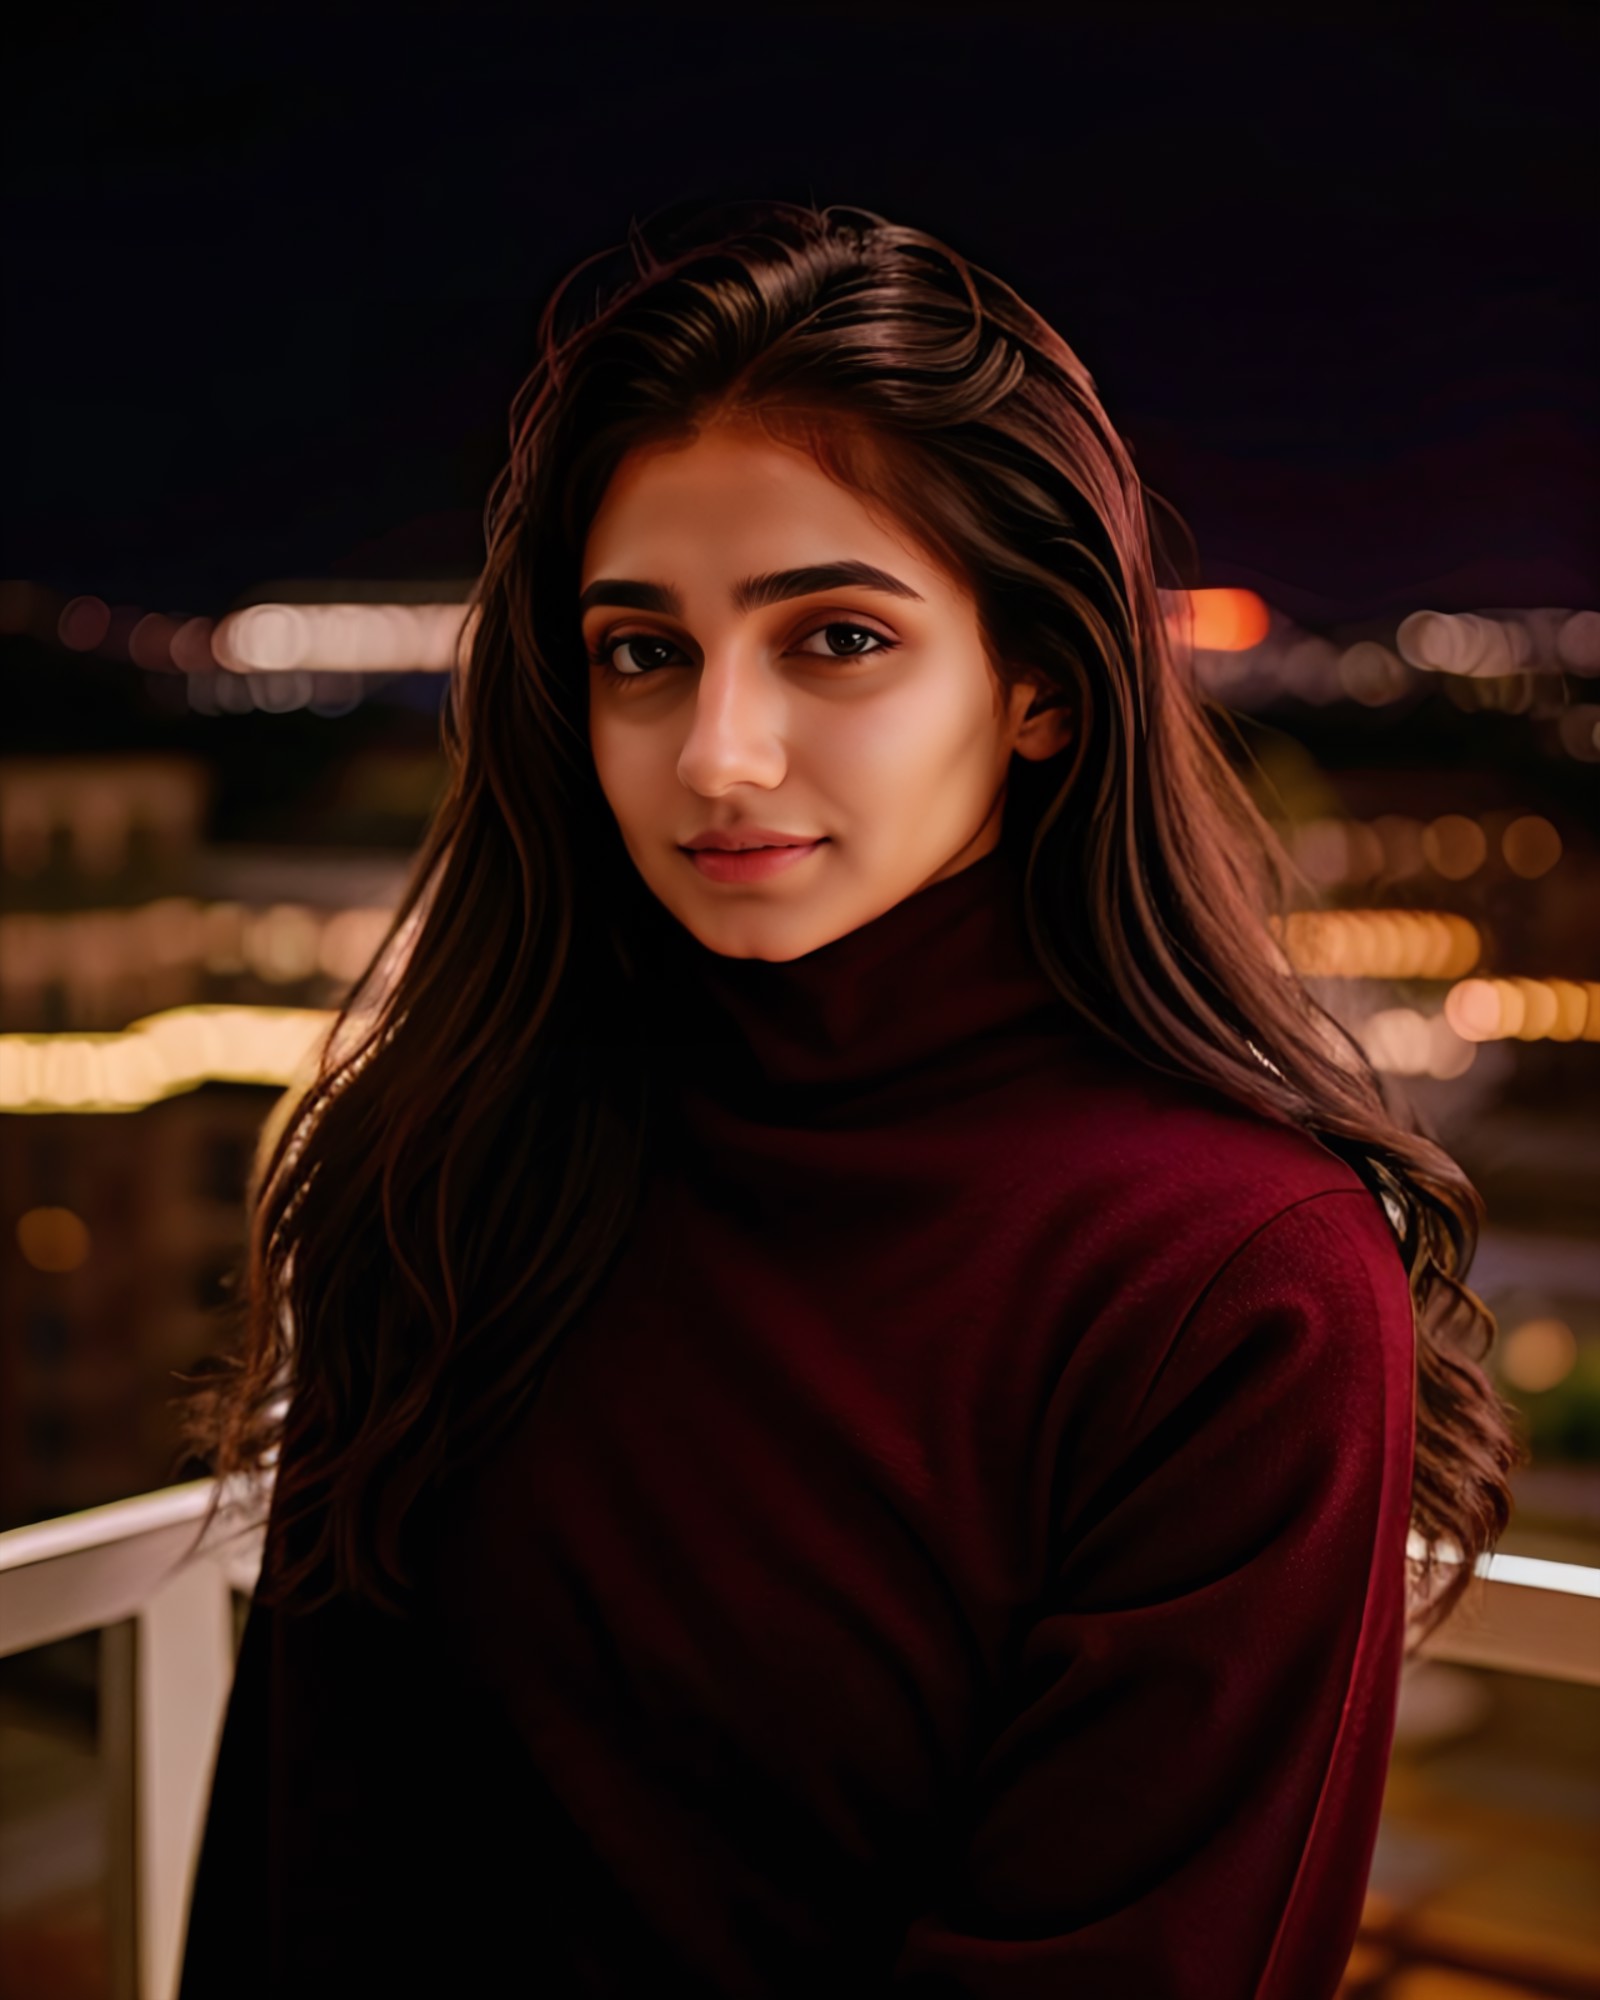 portrait photo of a vdka woman, wearing high-neck Burgundy clothing, solo, serious look, night time, city lights  in backg...